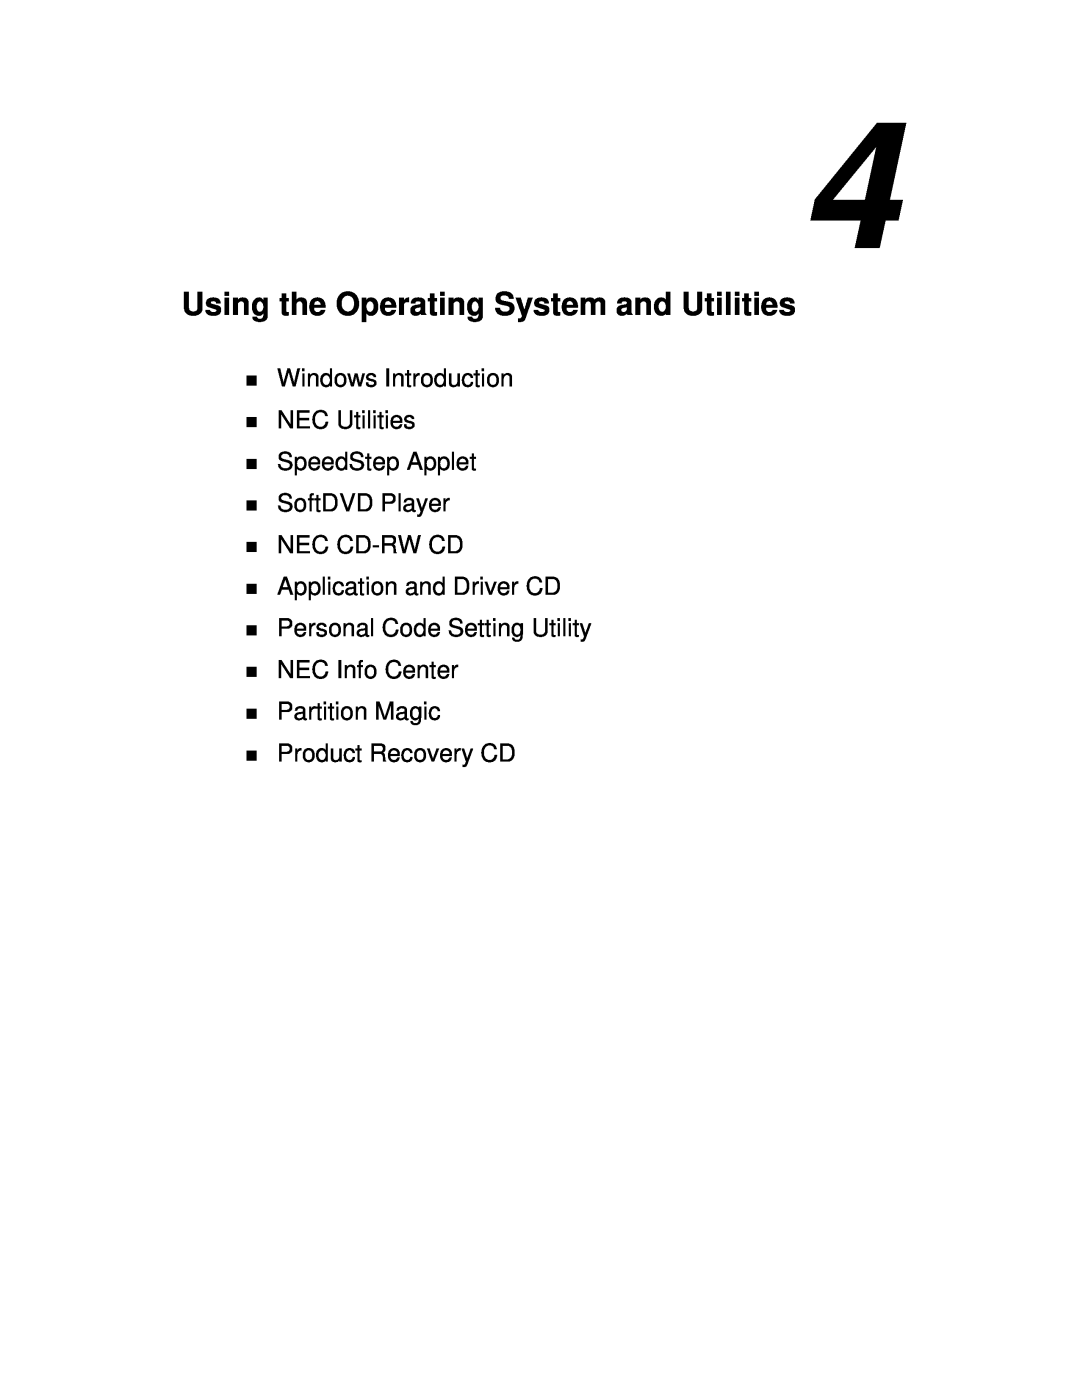 NEC VXi manual Using the Operating System and Utilities, Windows Introduction NEC Utilities, Application and Driver CD 